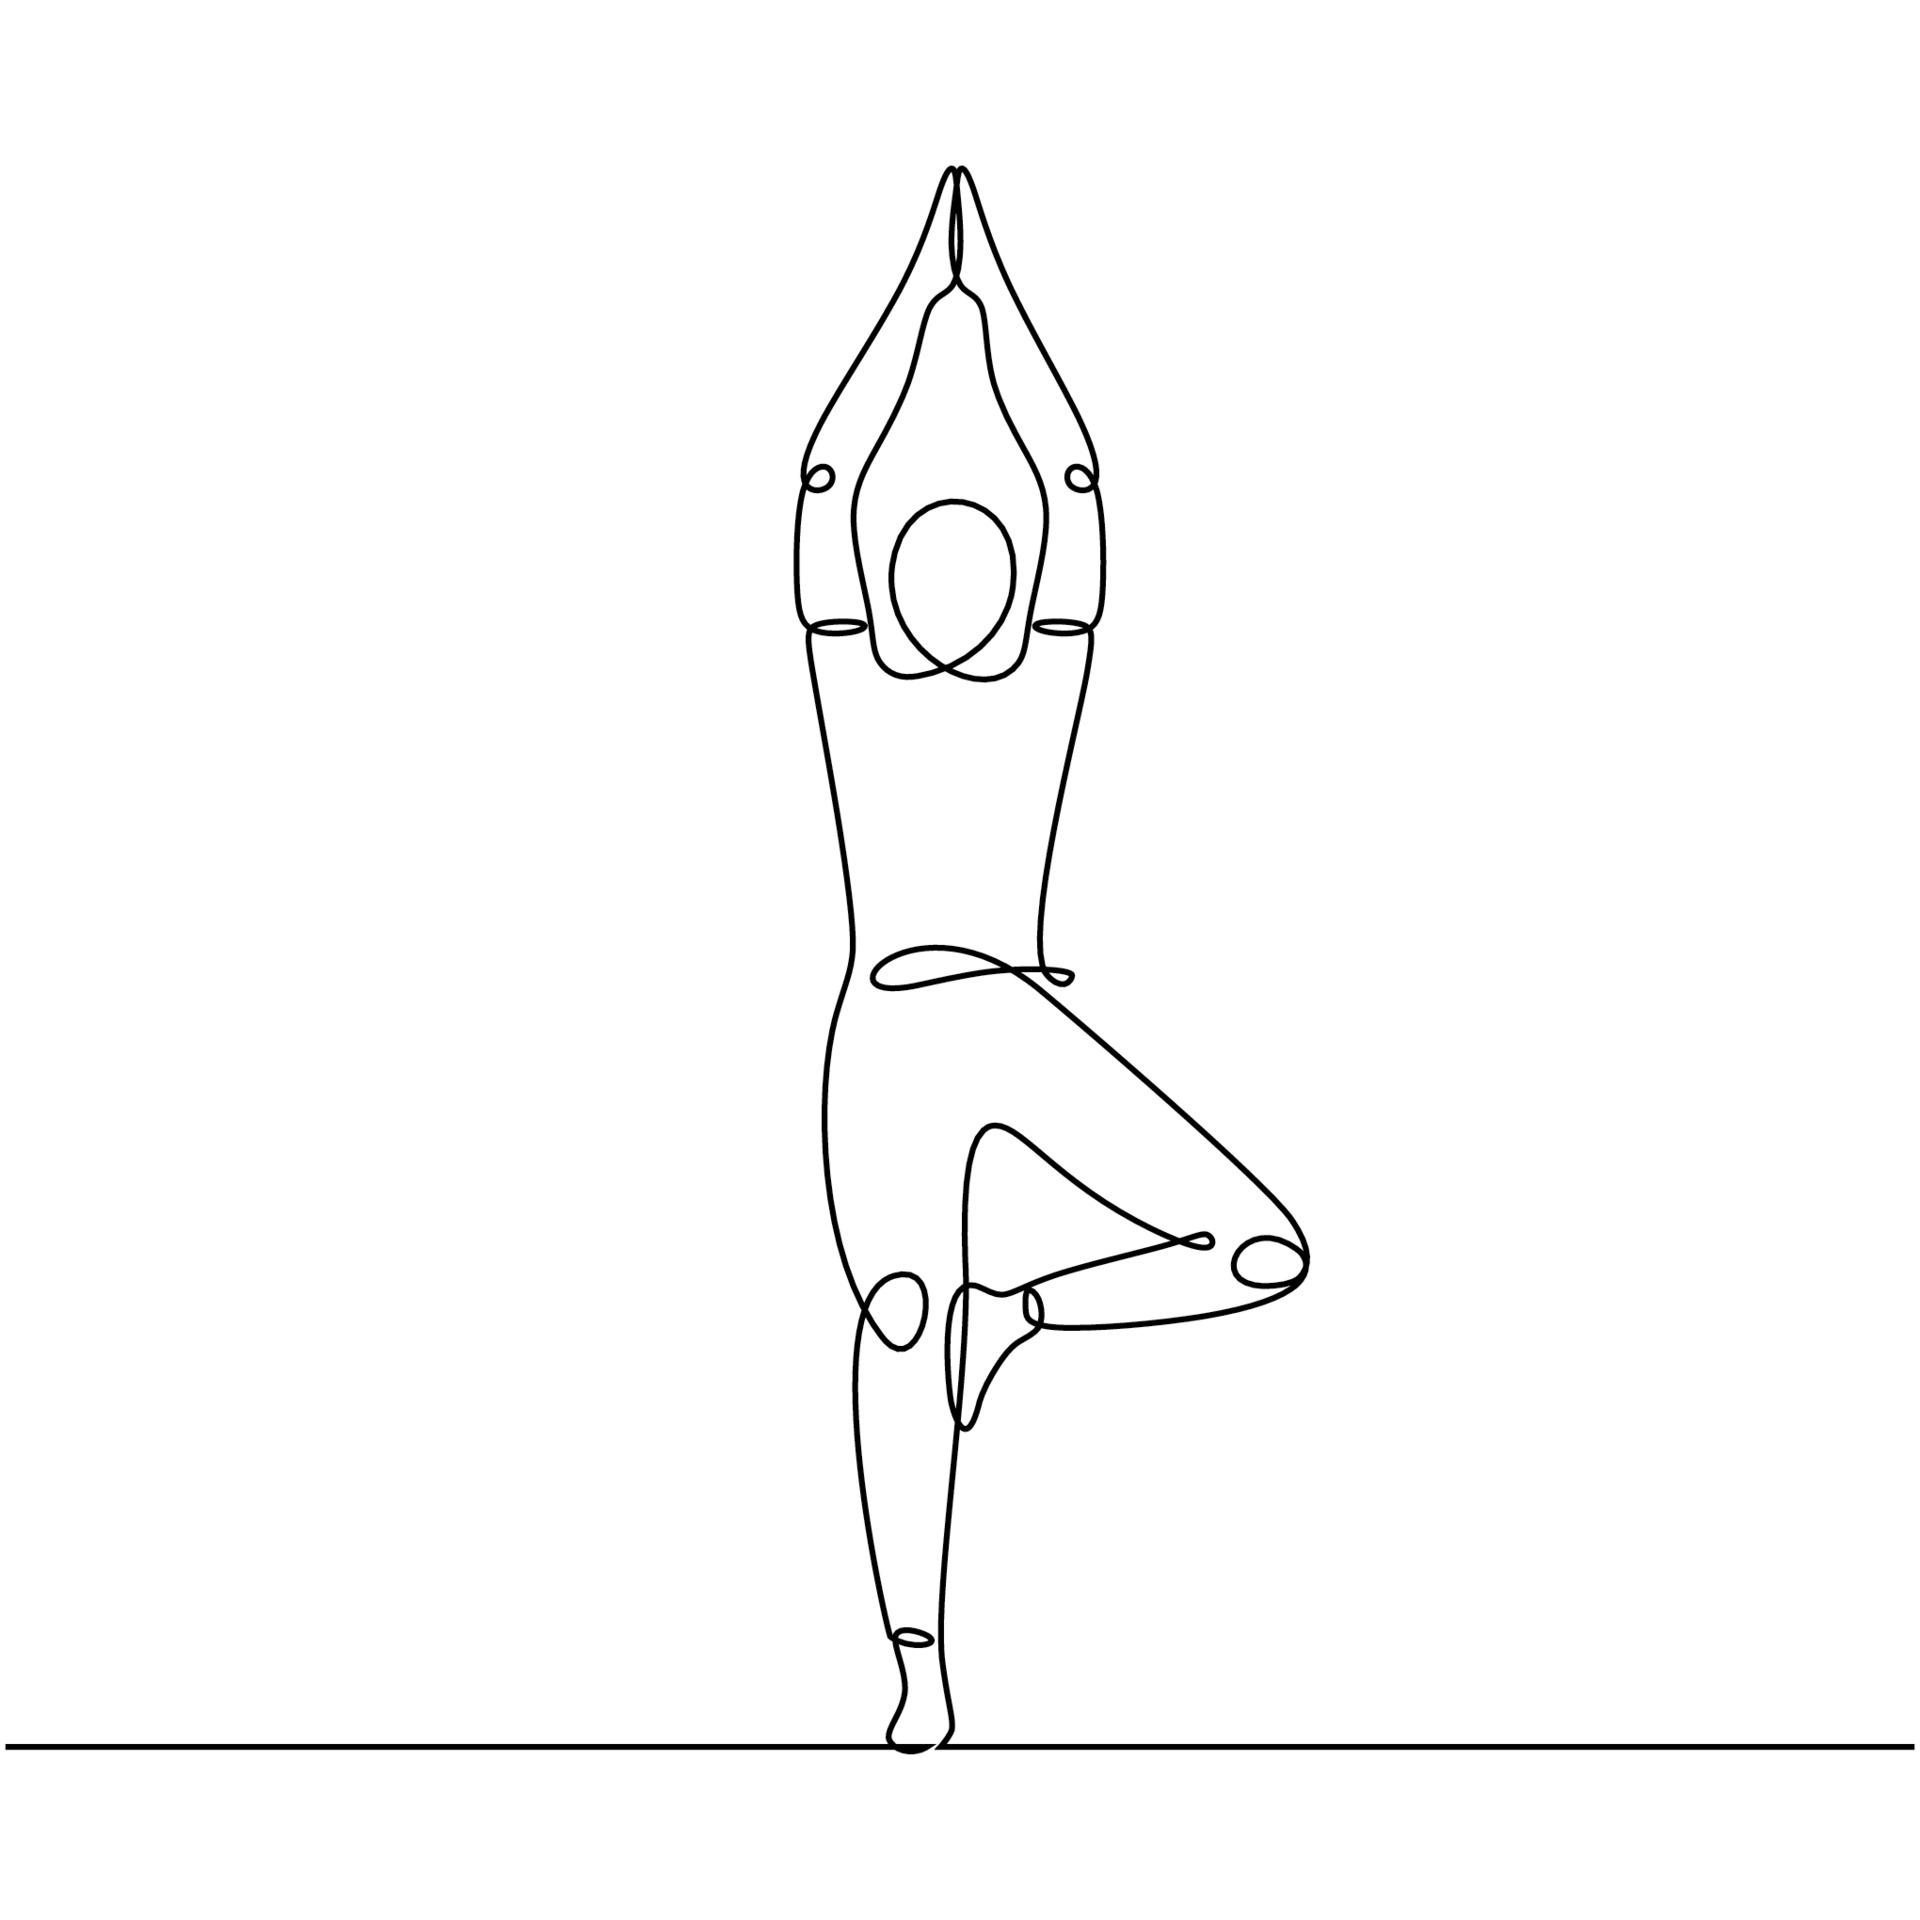 continuous line drawing of man standing in yoga pose with arms